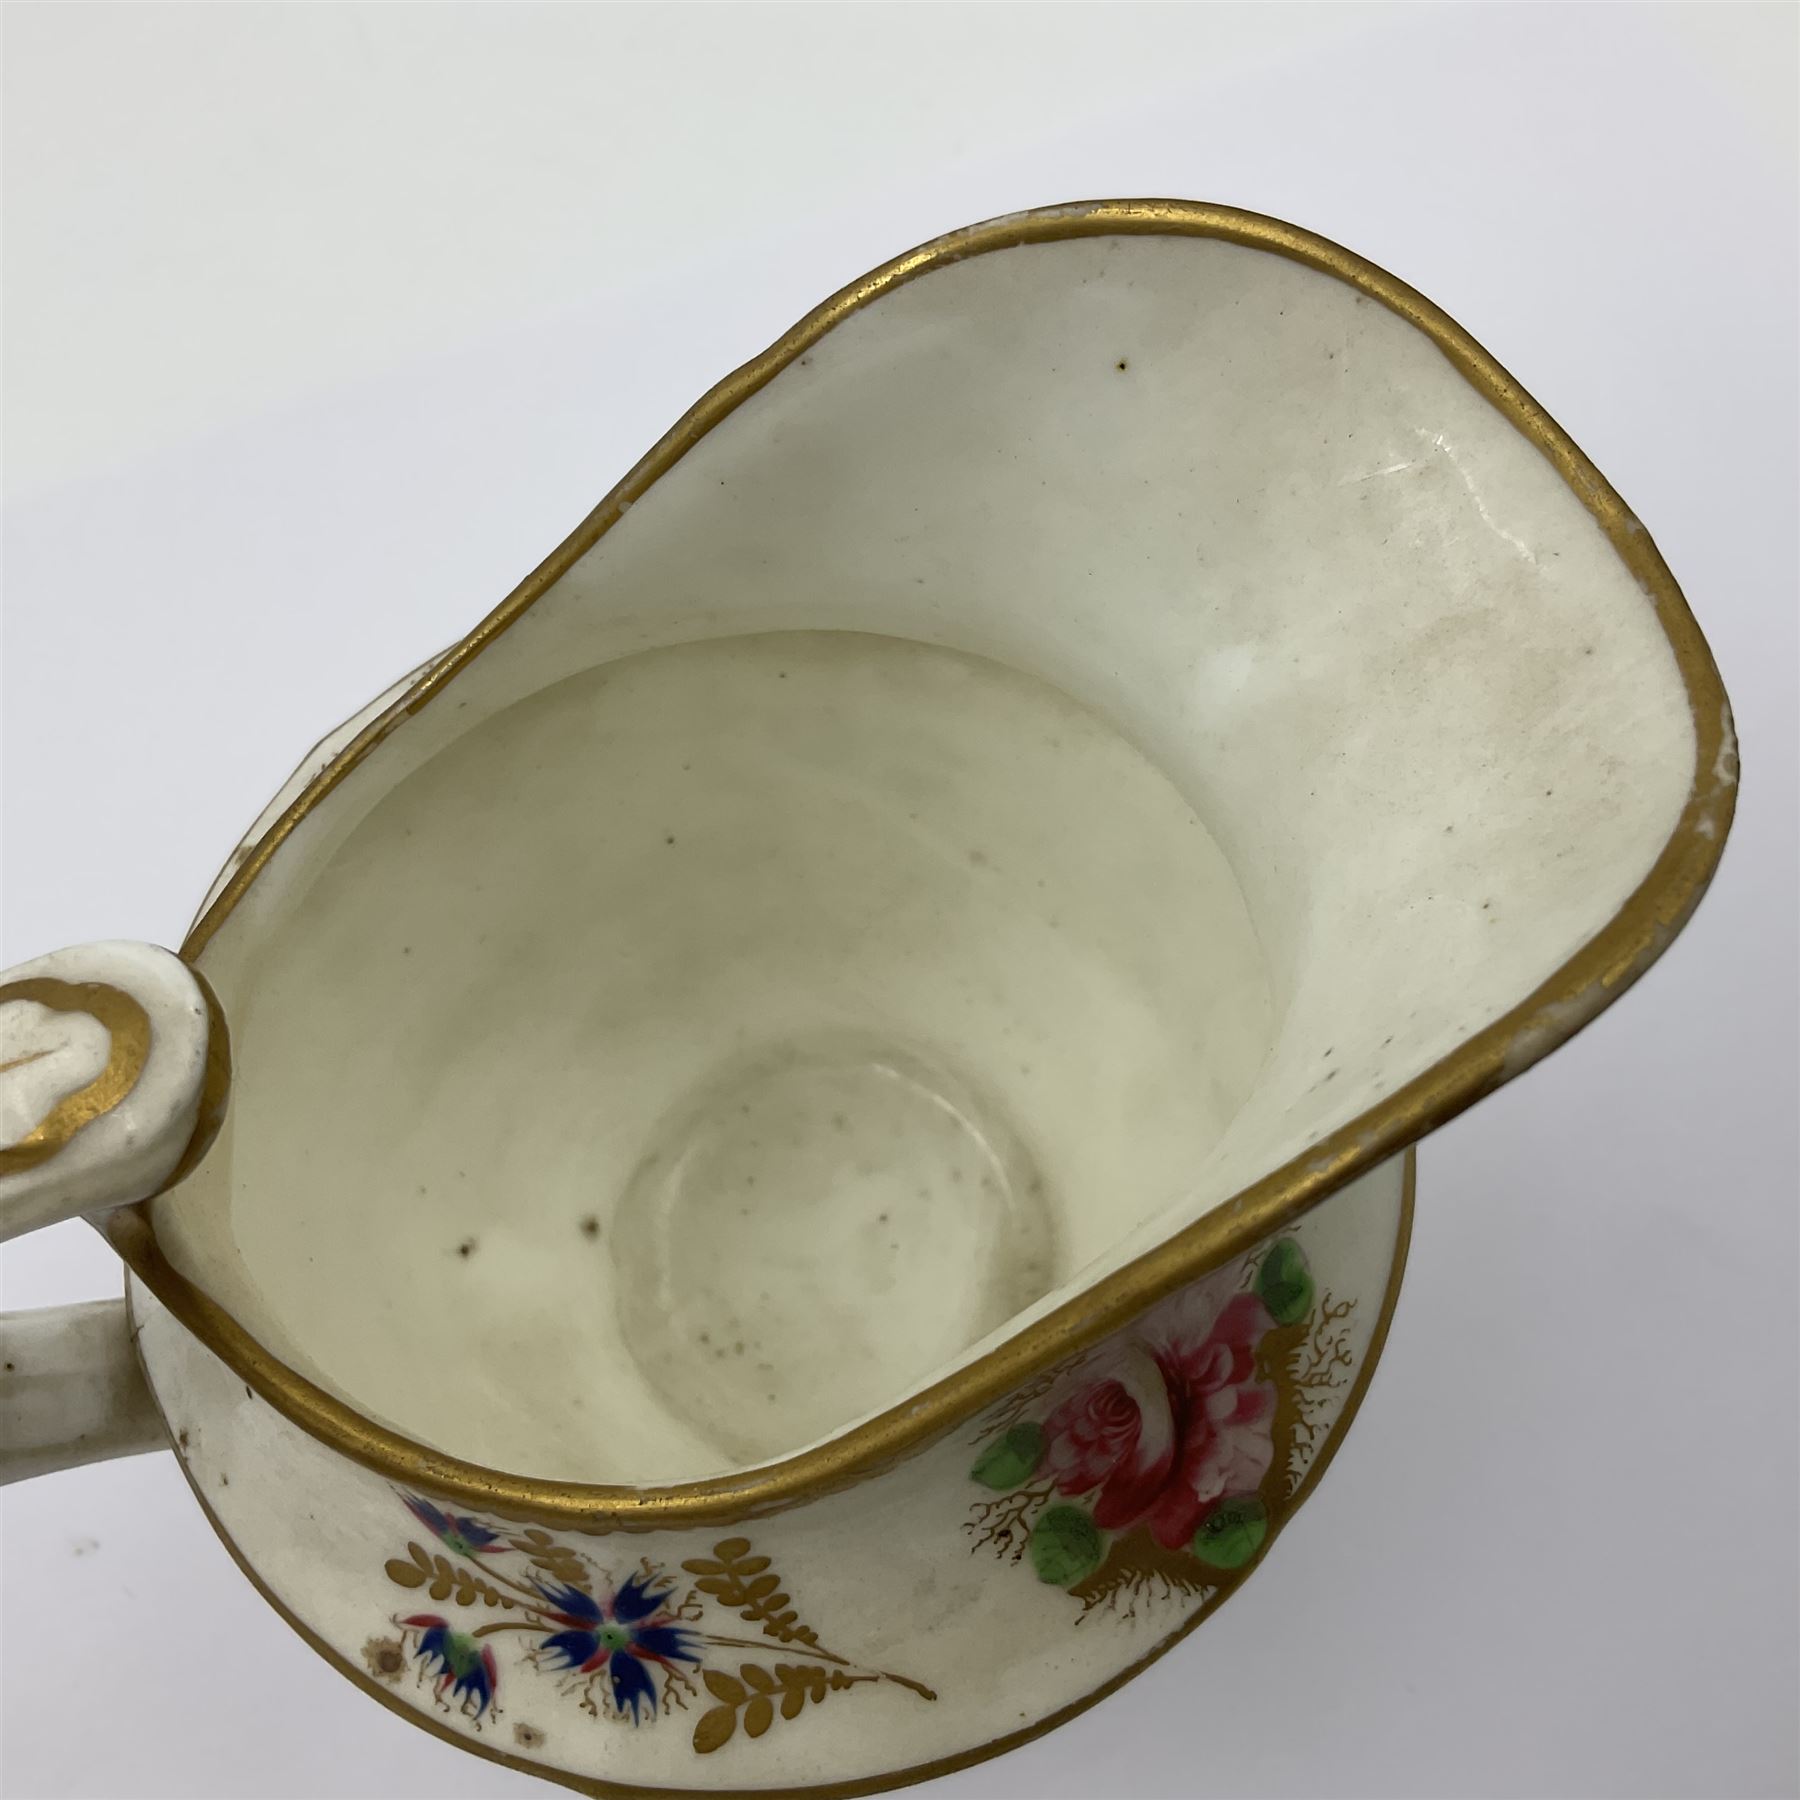 19th century Thomas Goode and Co jug - Image 12 of 22